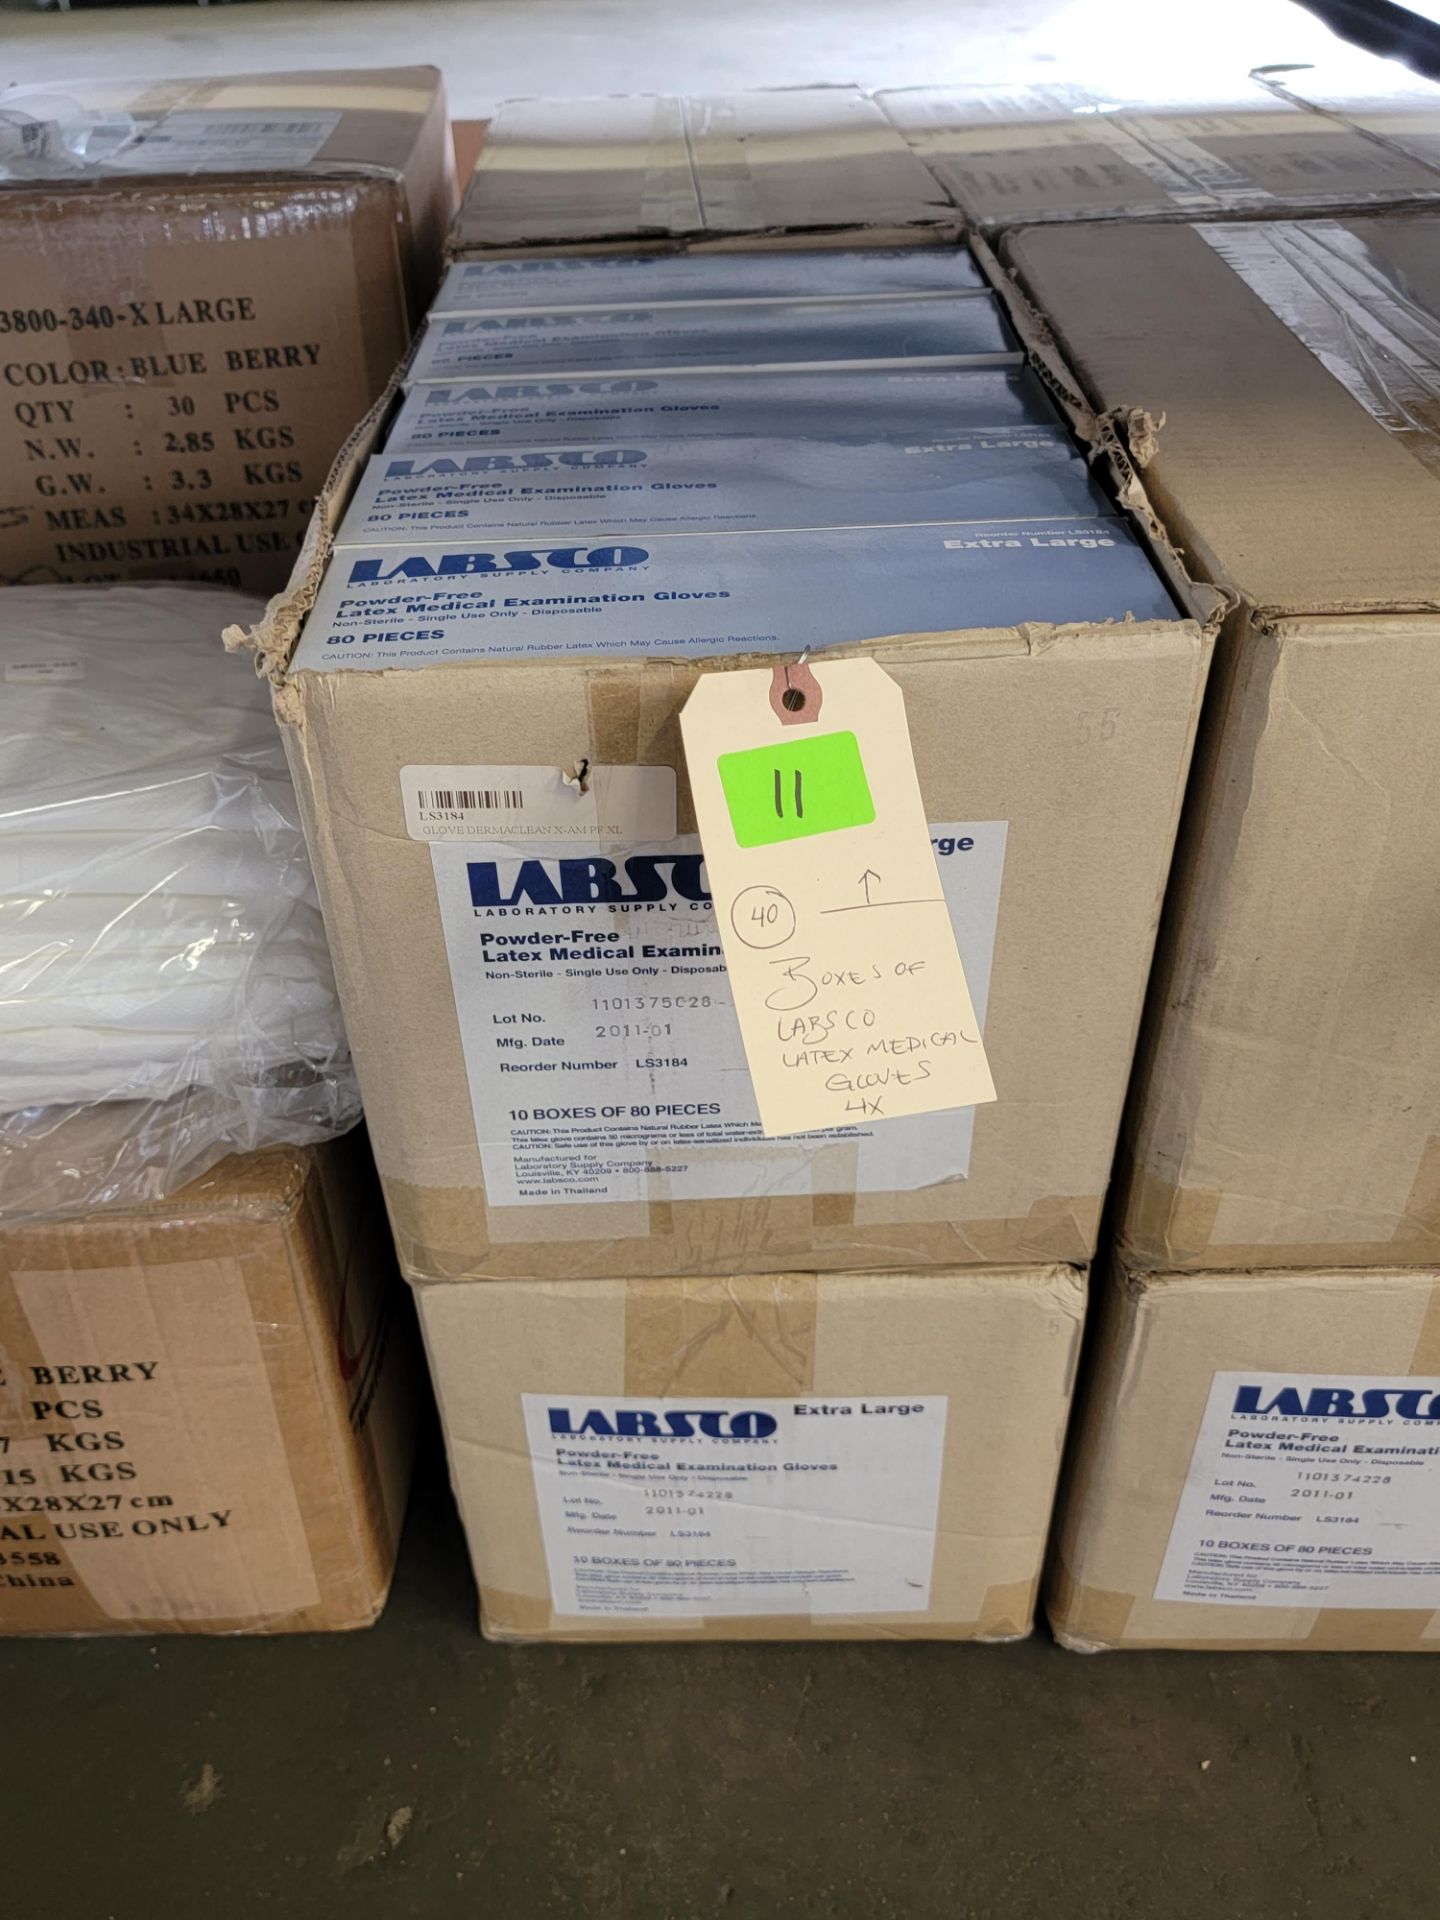 BOXES OF LABSCO LATEX MEDICAL GLOVES 4X